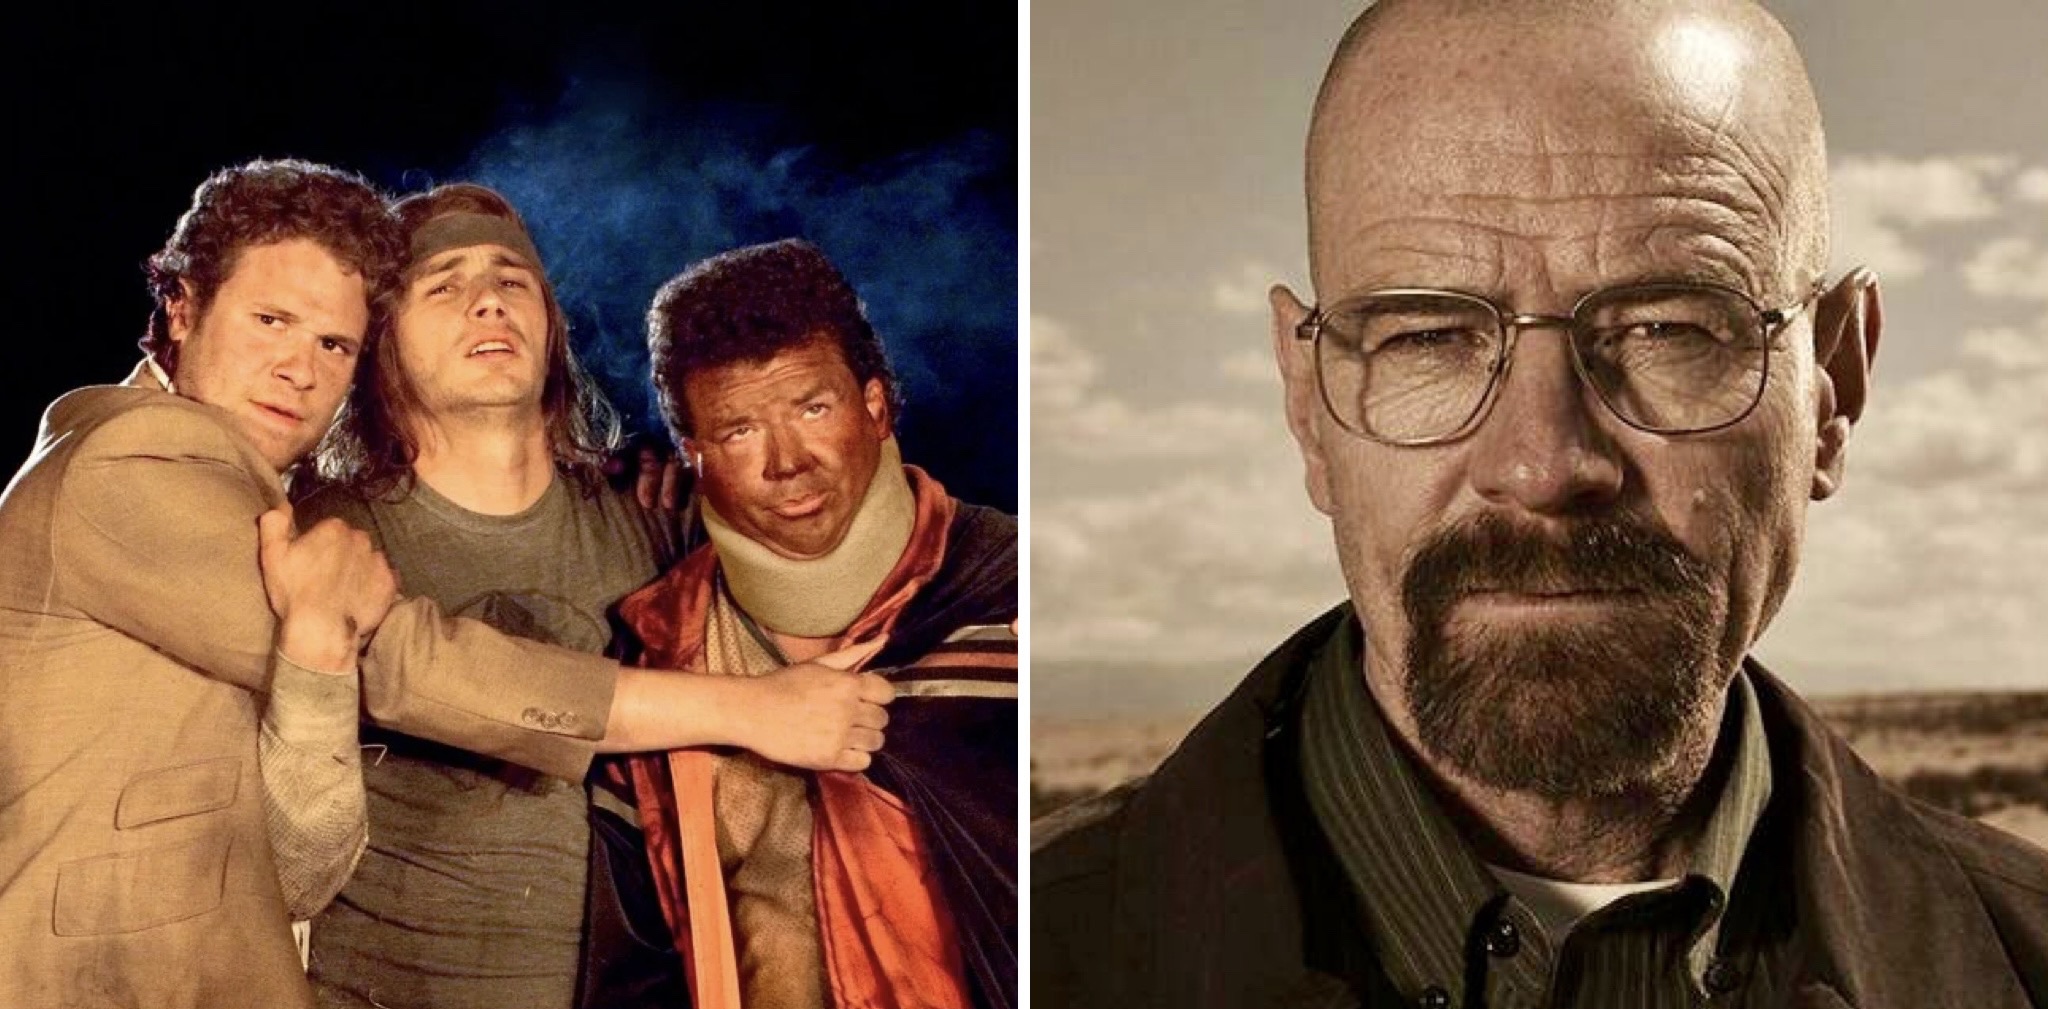 Bryan Cranston almost starred in Pineapple Express